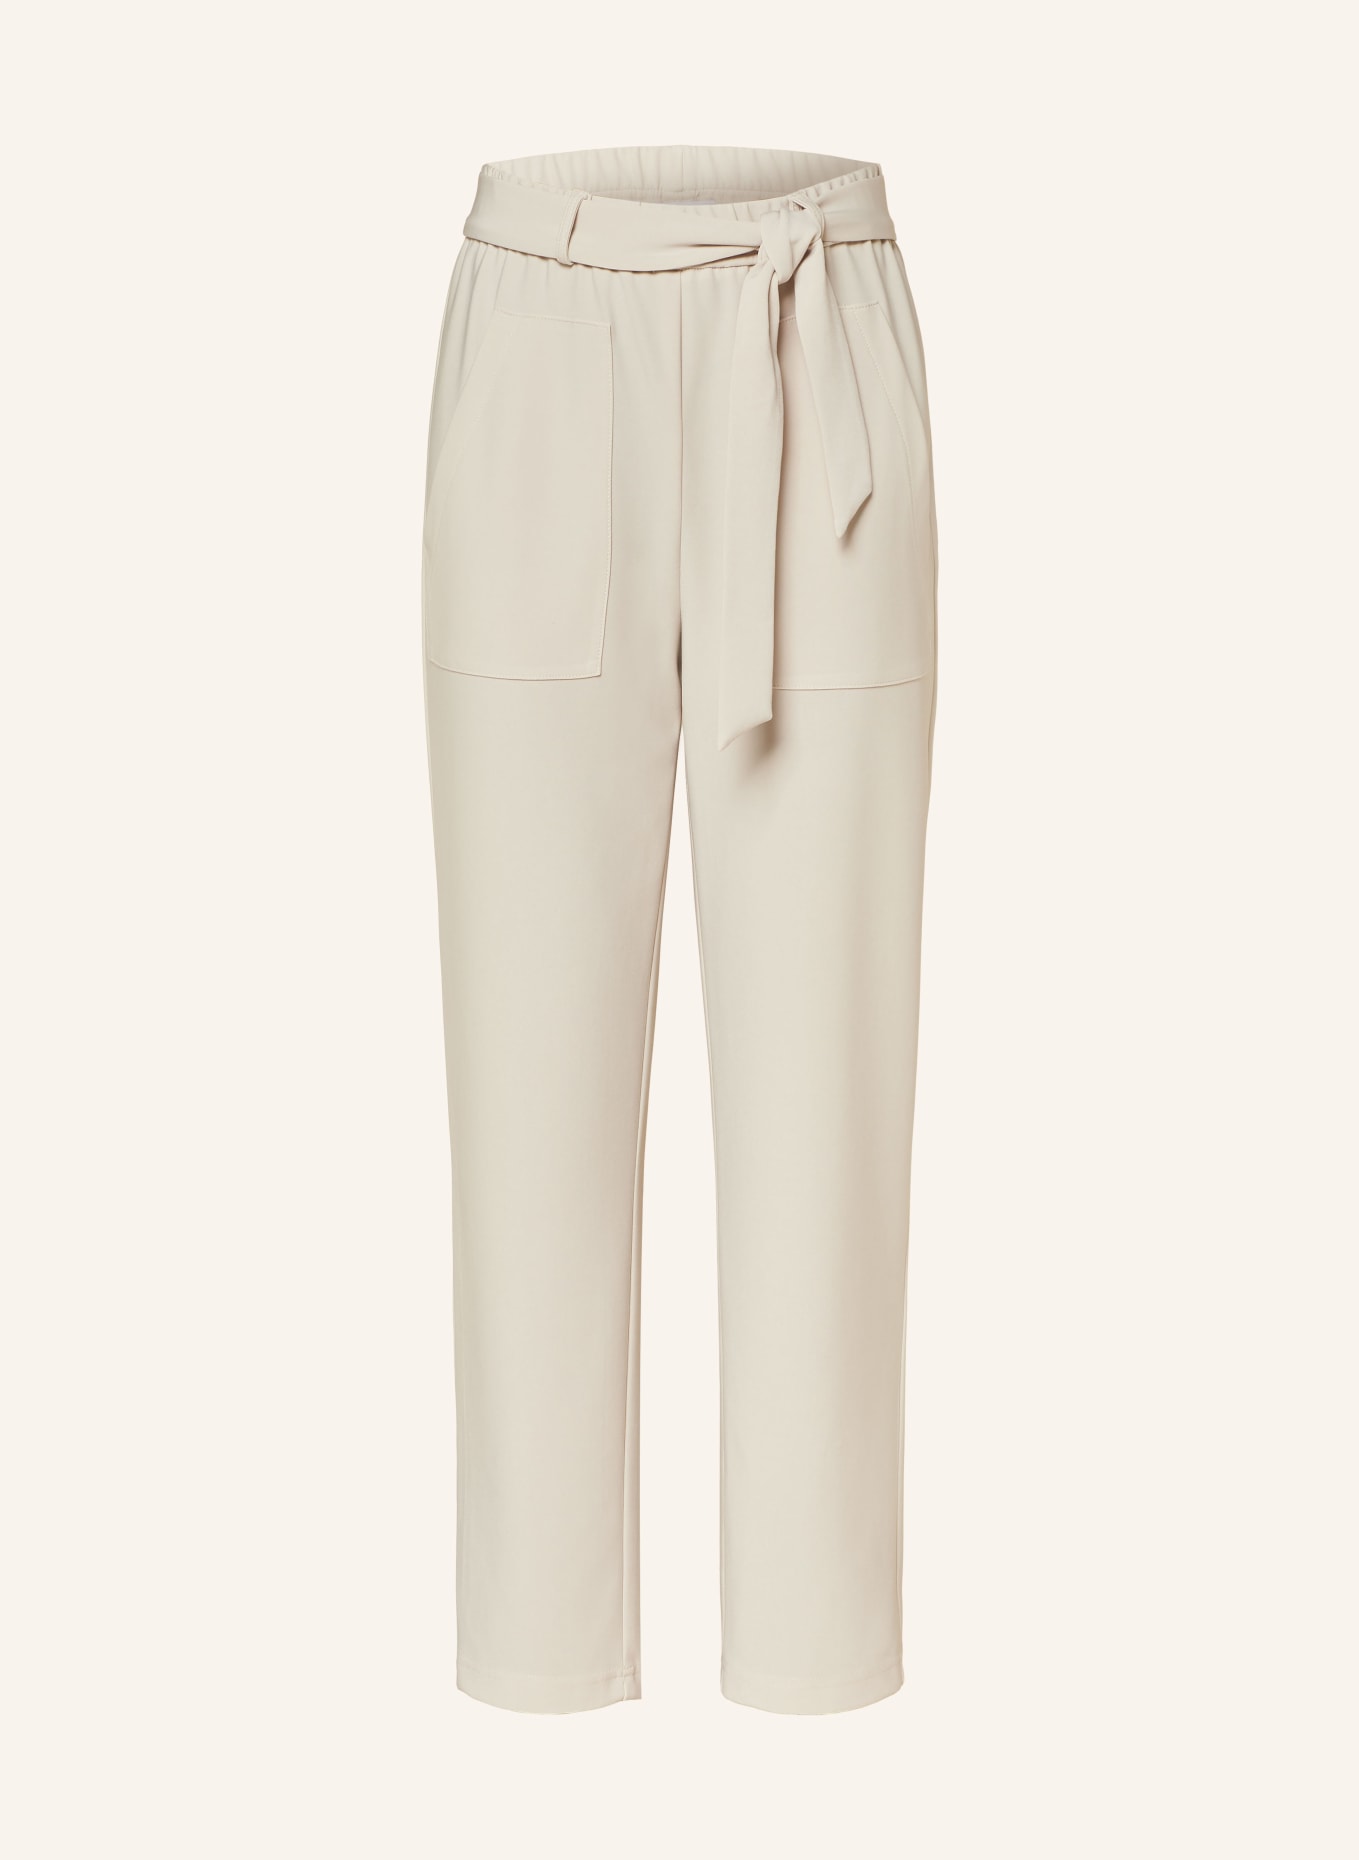 Joseph Ribkoff Paper bag trousers made of jersey, Color: CREAM (Image 1)